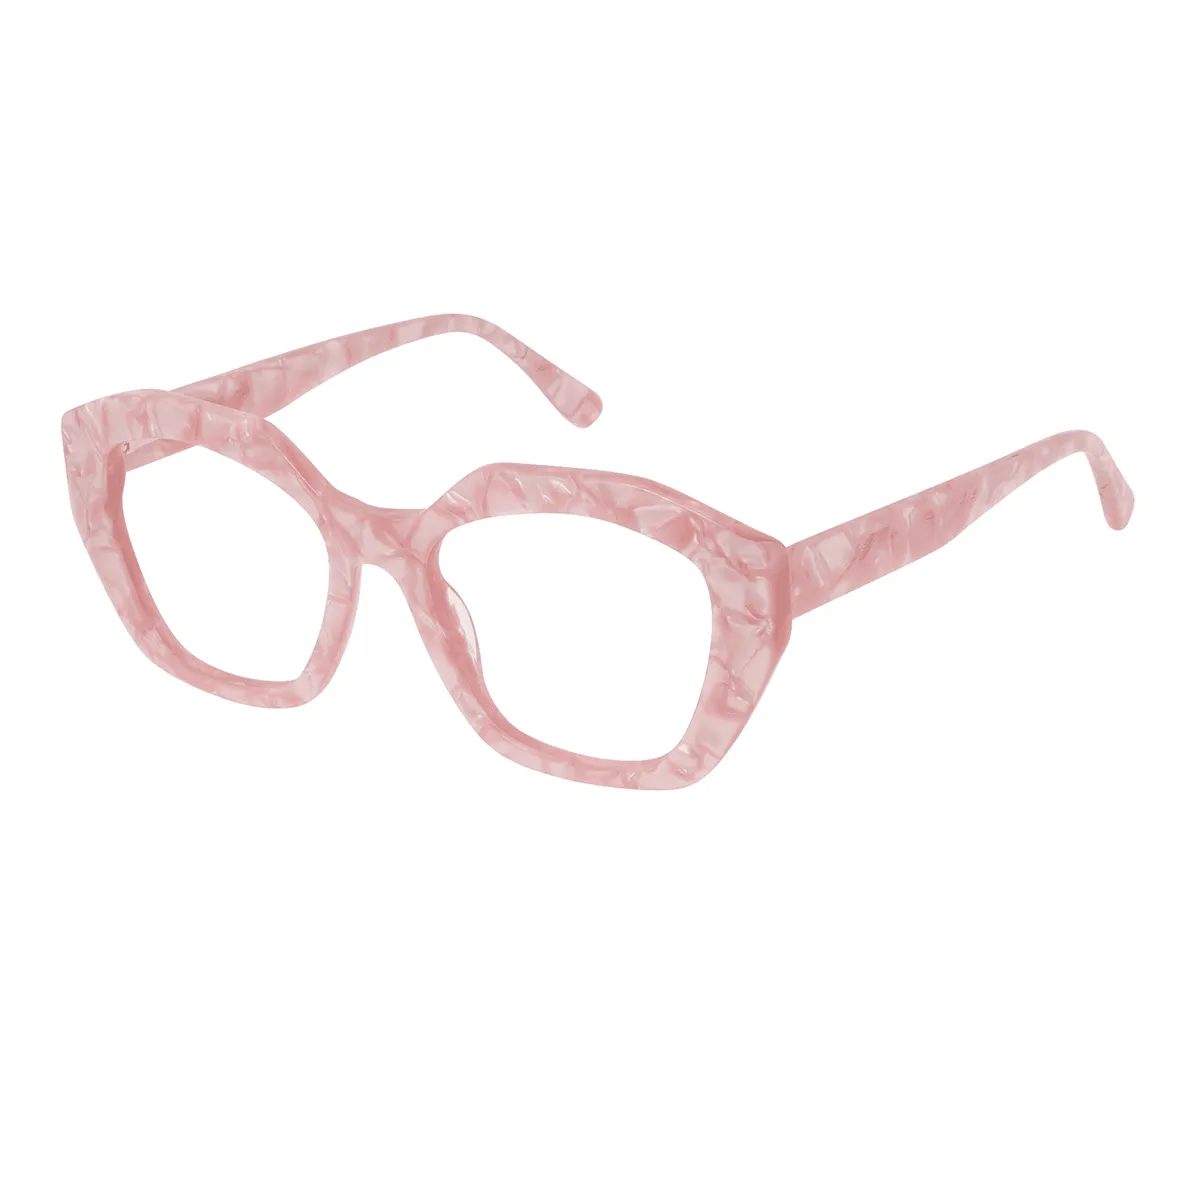 Anslow - Geometric Pink Glasses for Women